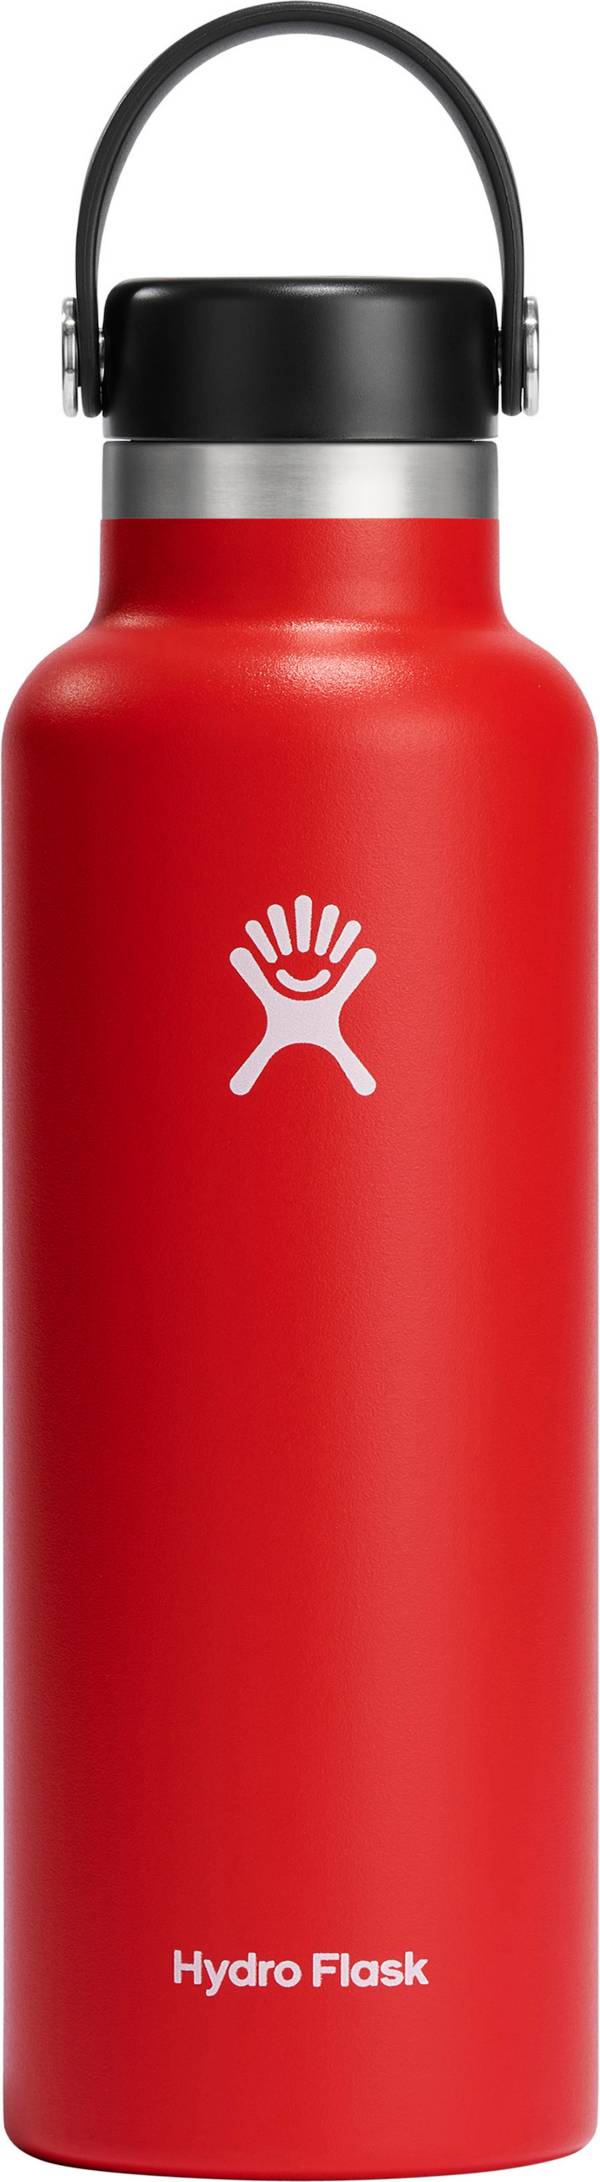 Hydro Flask Standard Mouth 18 oz. Bottle product image